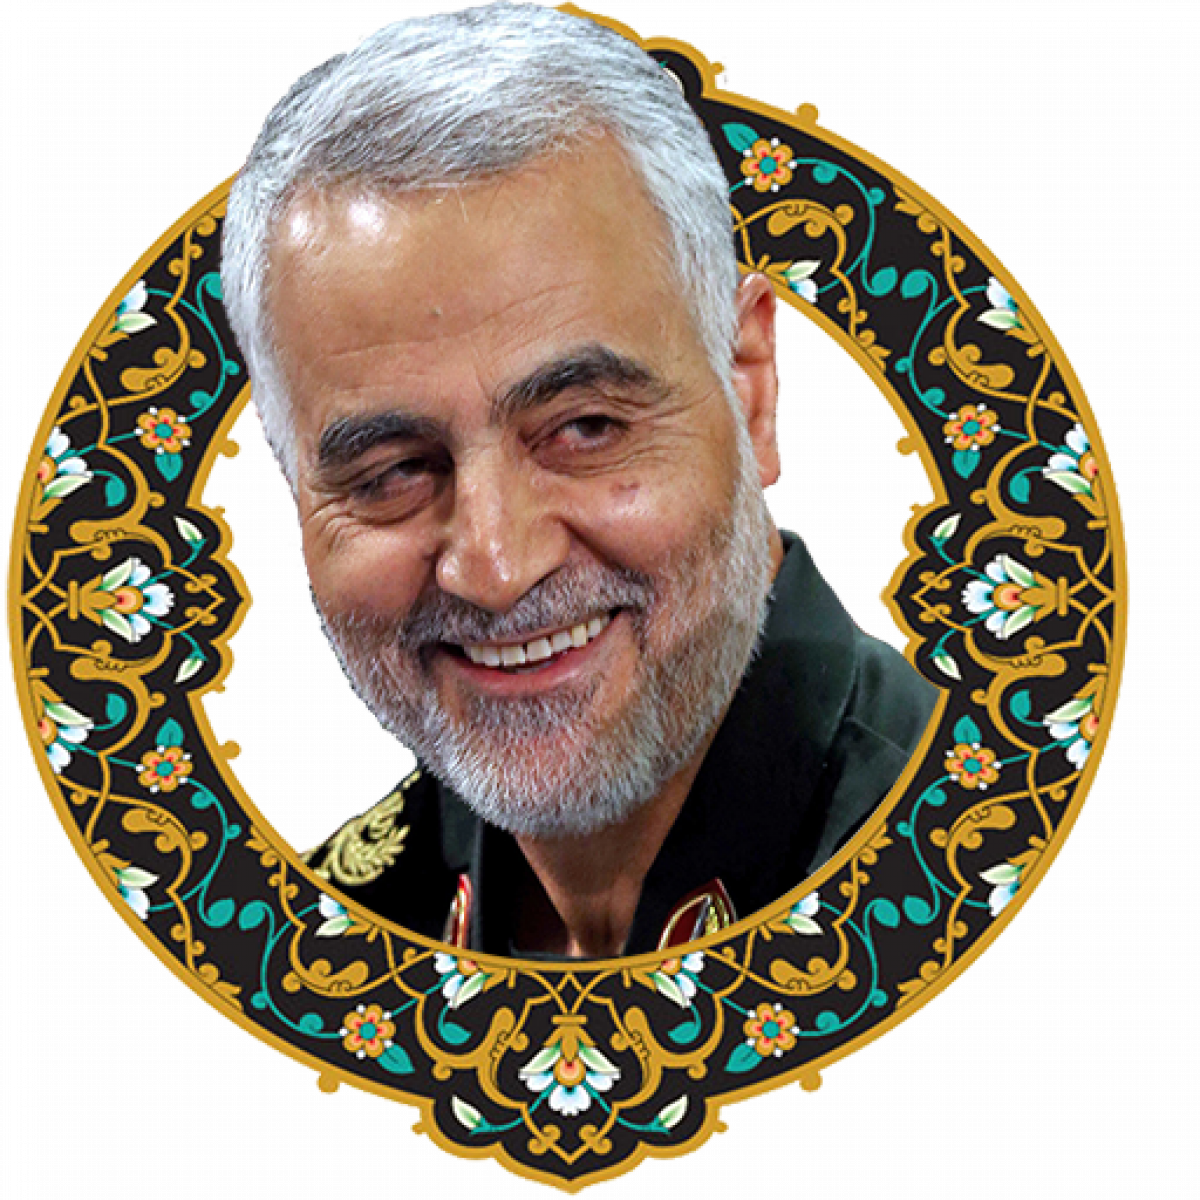 Any conflict after Soleimani’s martyrdom will be a nightmare for the Arab Gulf states